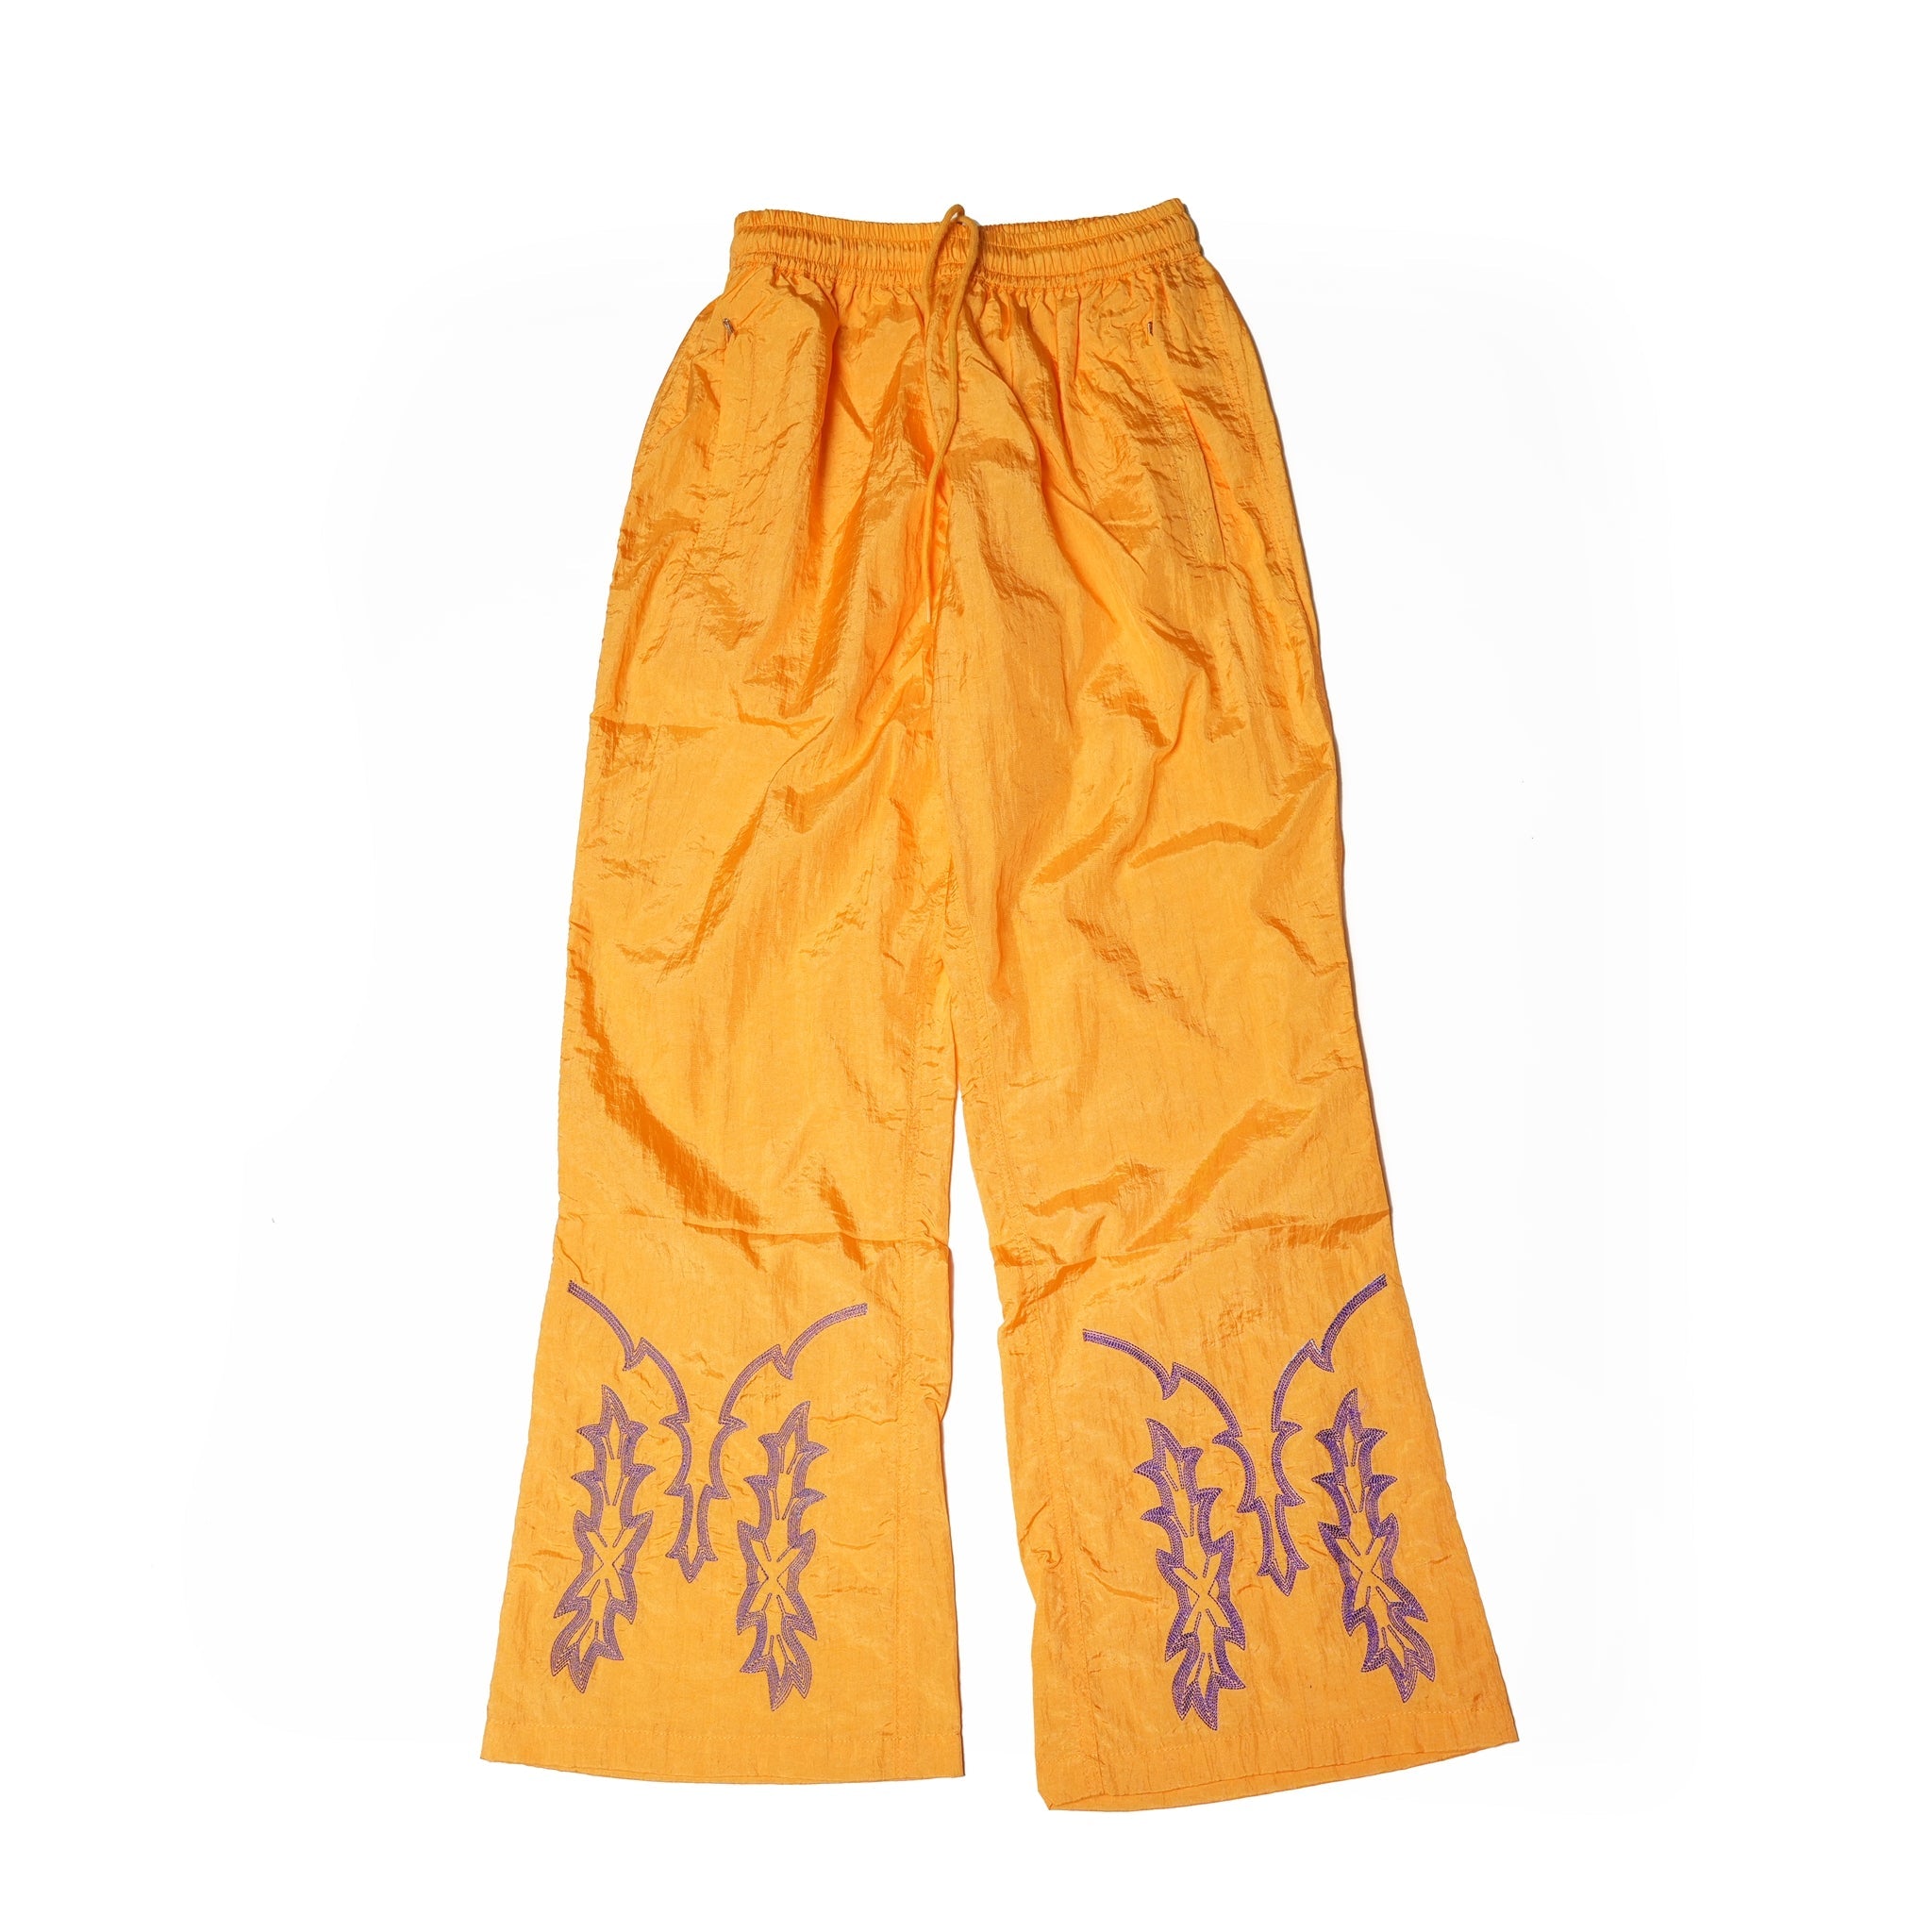 No:OK241-501_GOLD | Name:Nylon Embroidery Pants | Color:Gold【OK_オーケー】【入荷予定アイテム・入荷連絡可能】